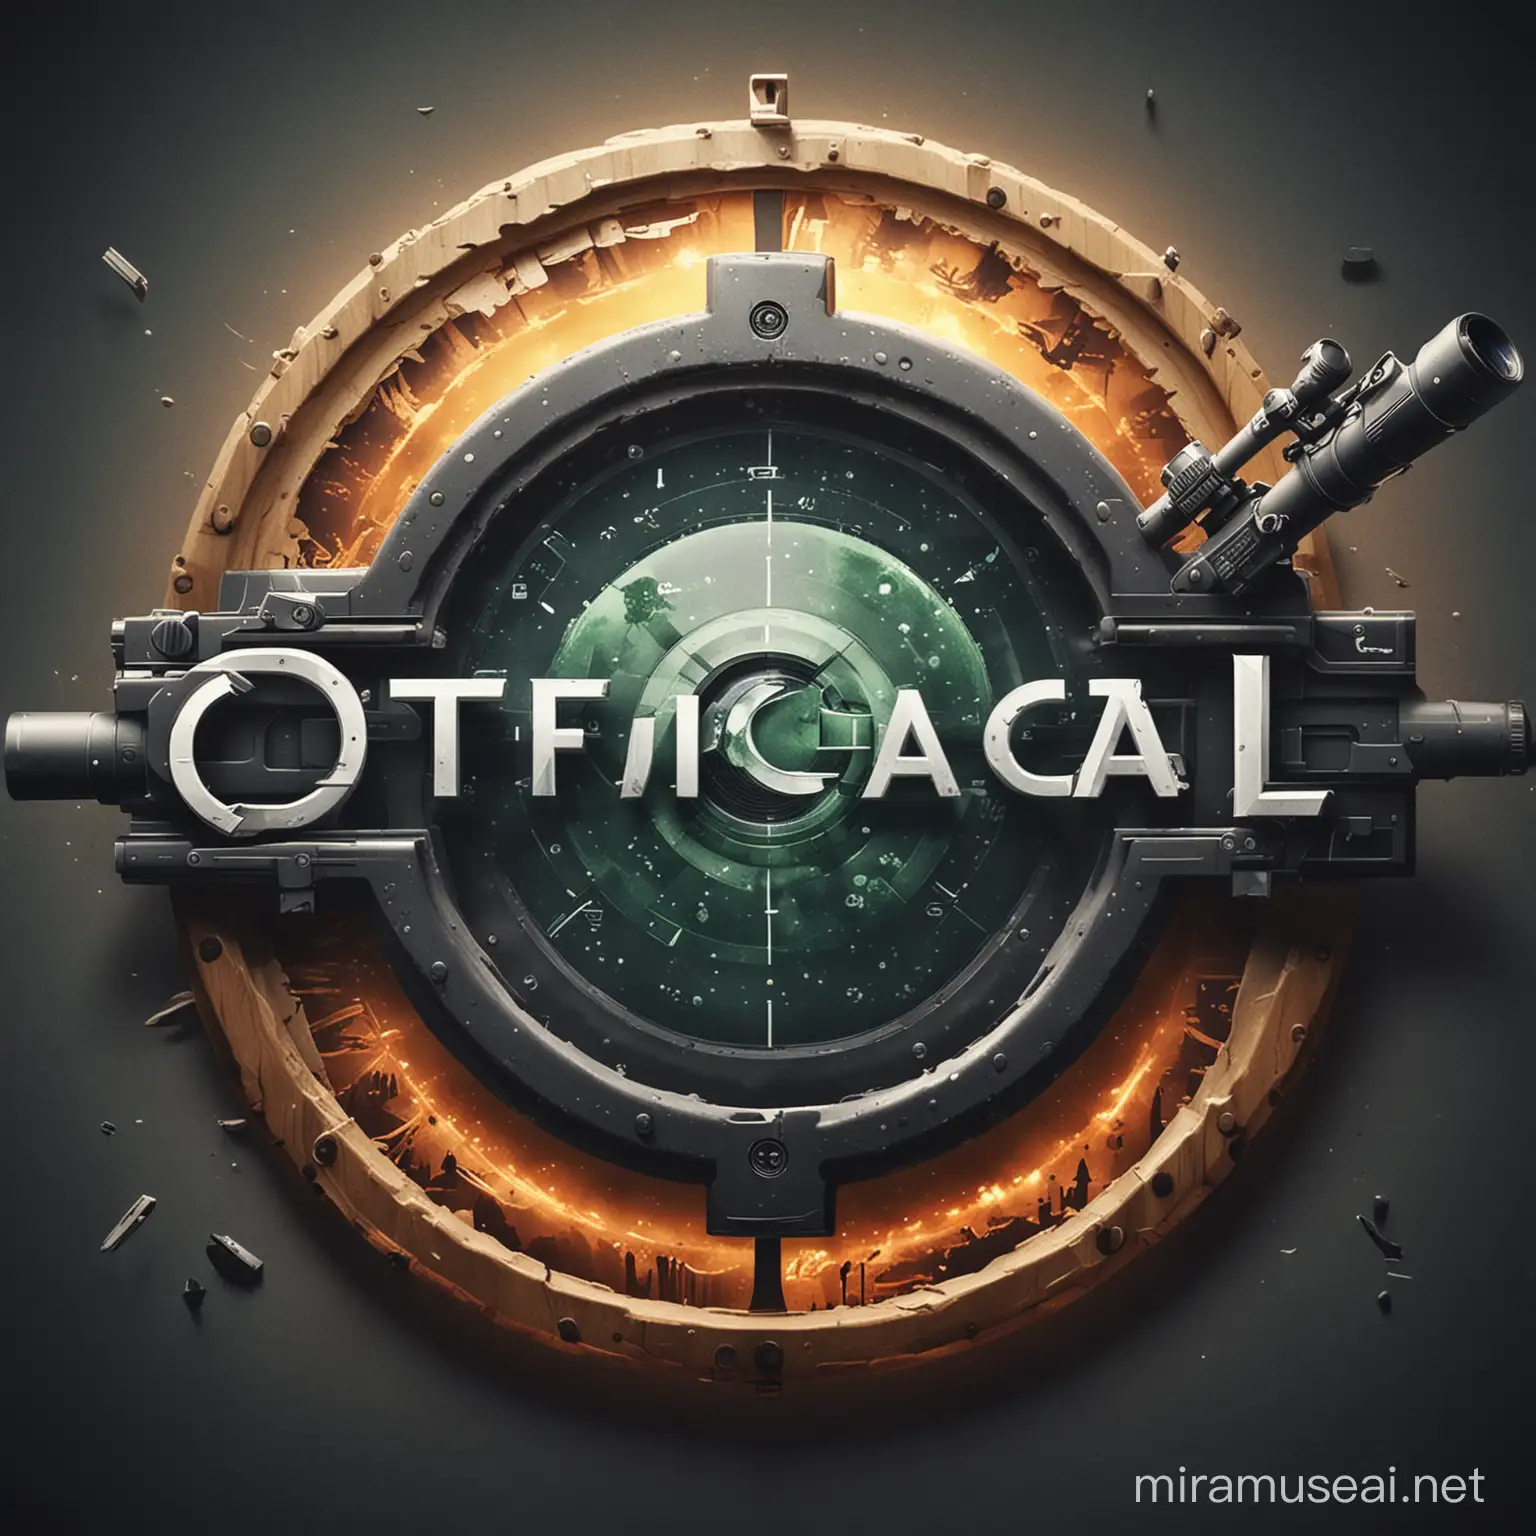 a gaming logo with a sniper scope that has the word Optical